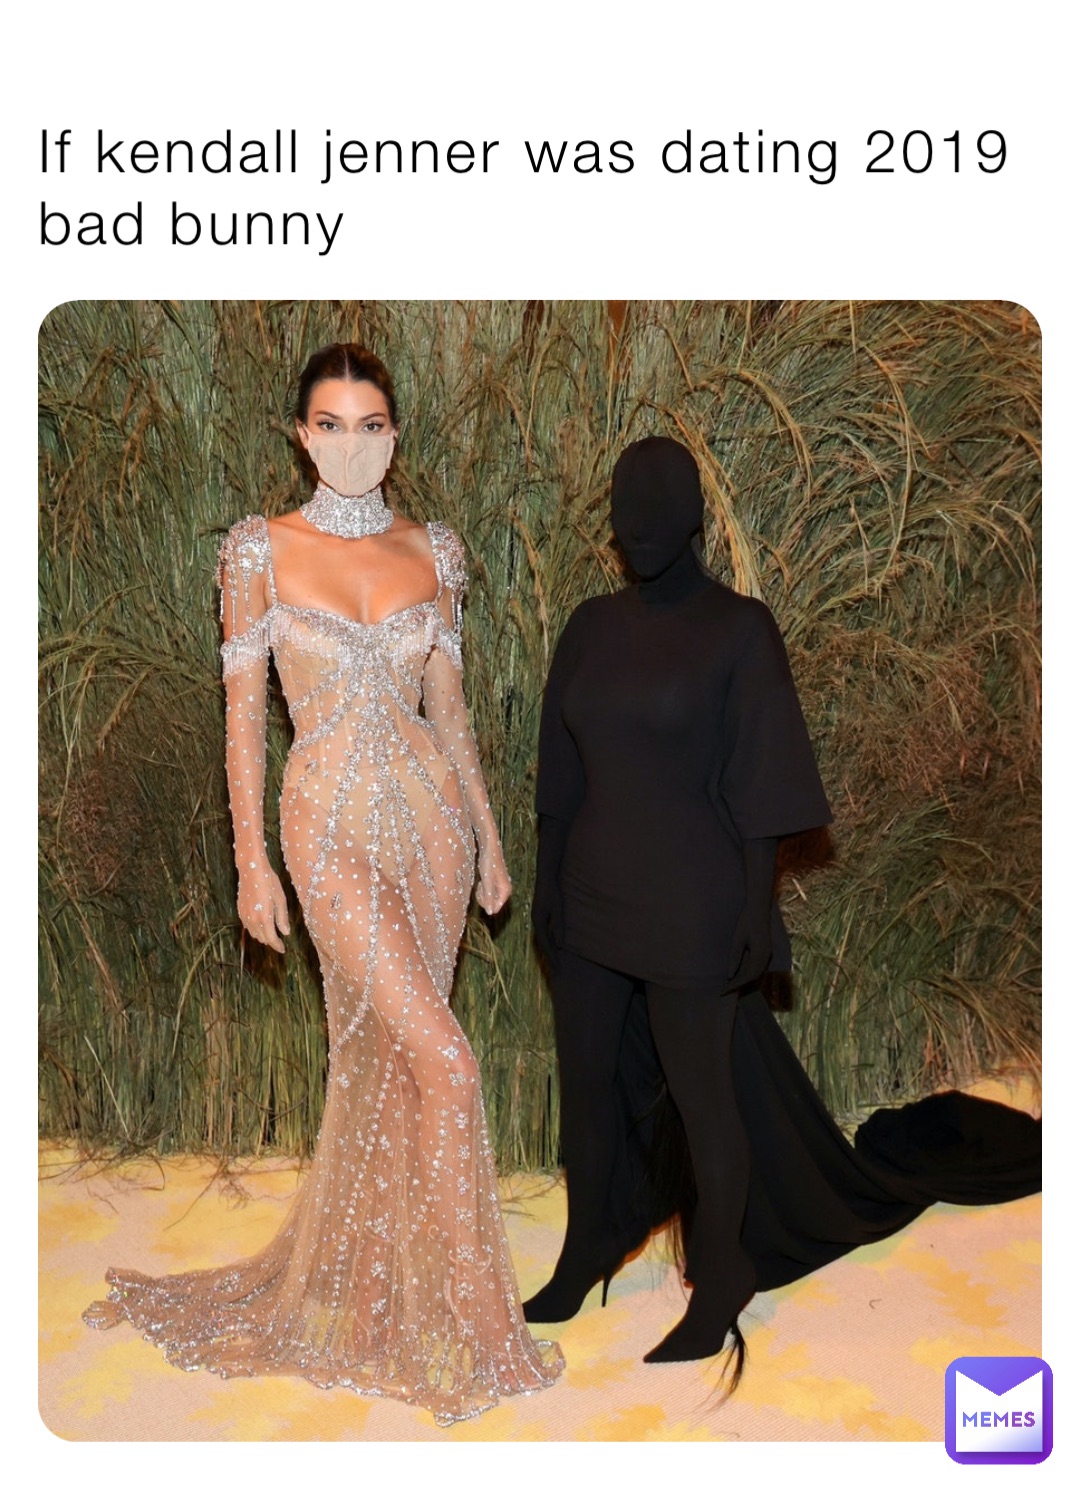 If kendall jenner was dating 2019 bad bunny